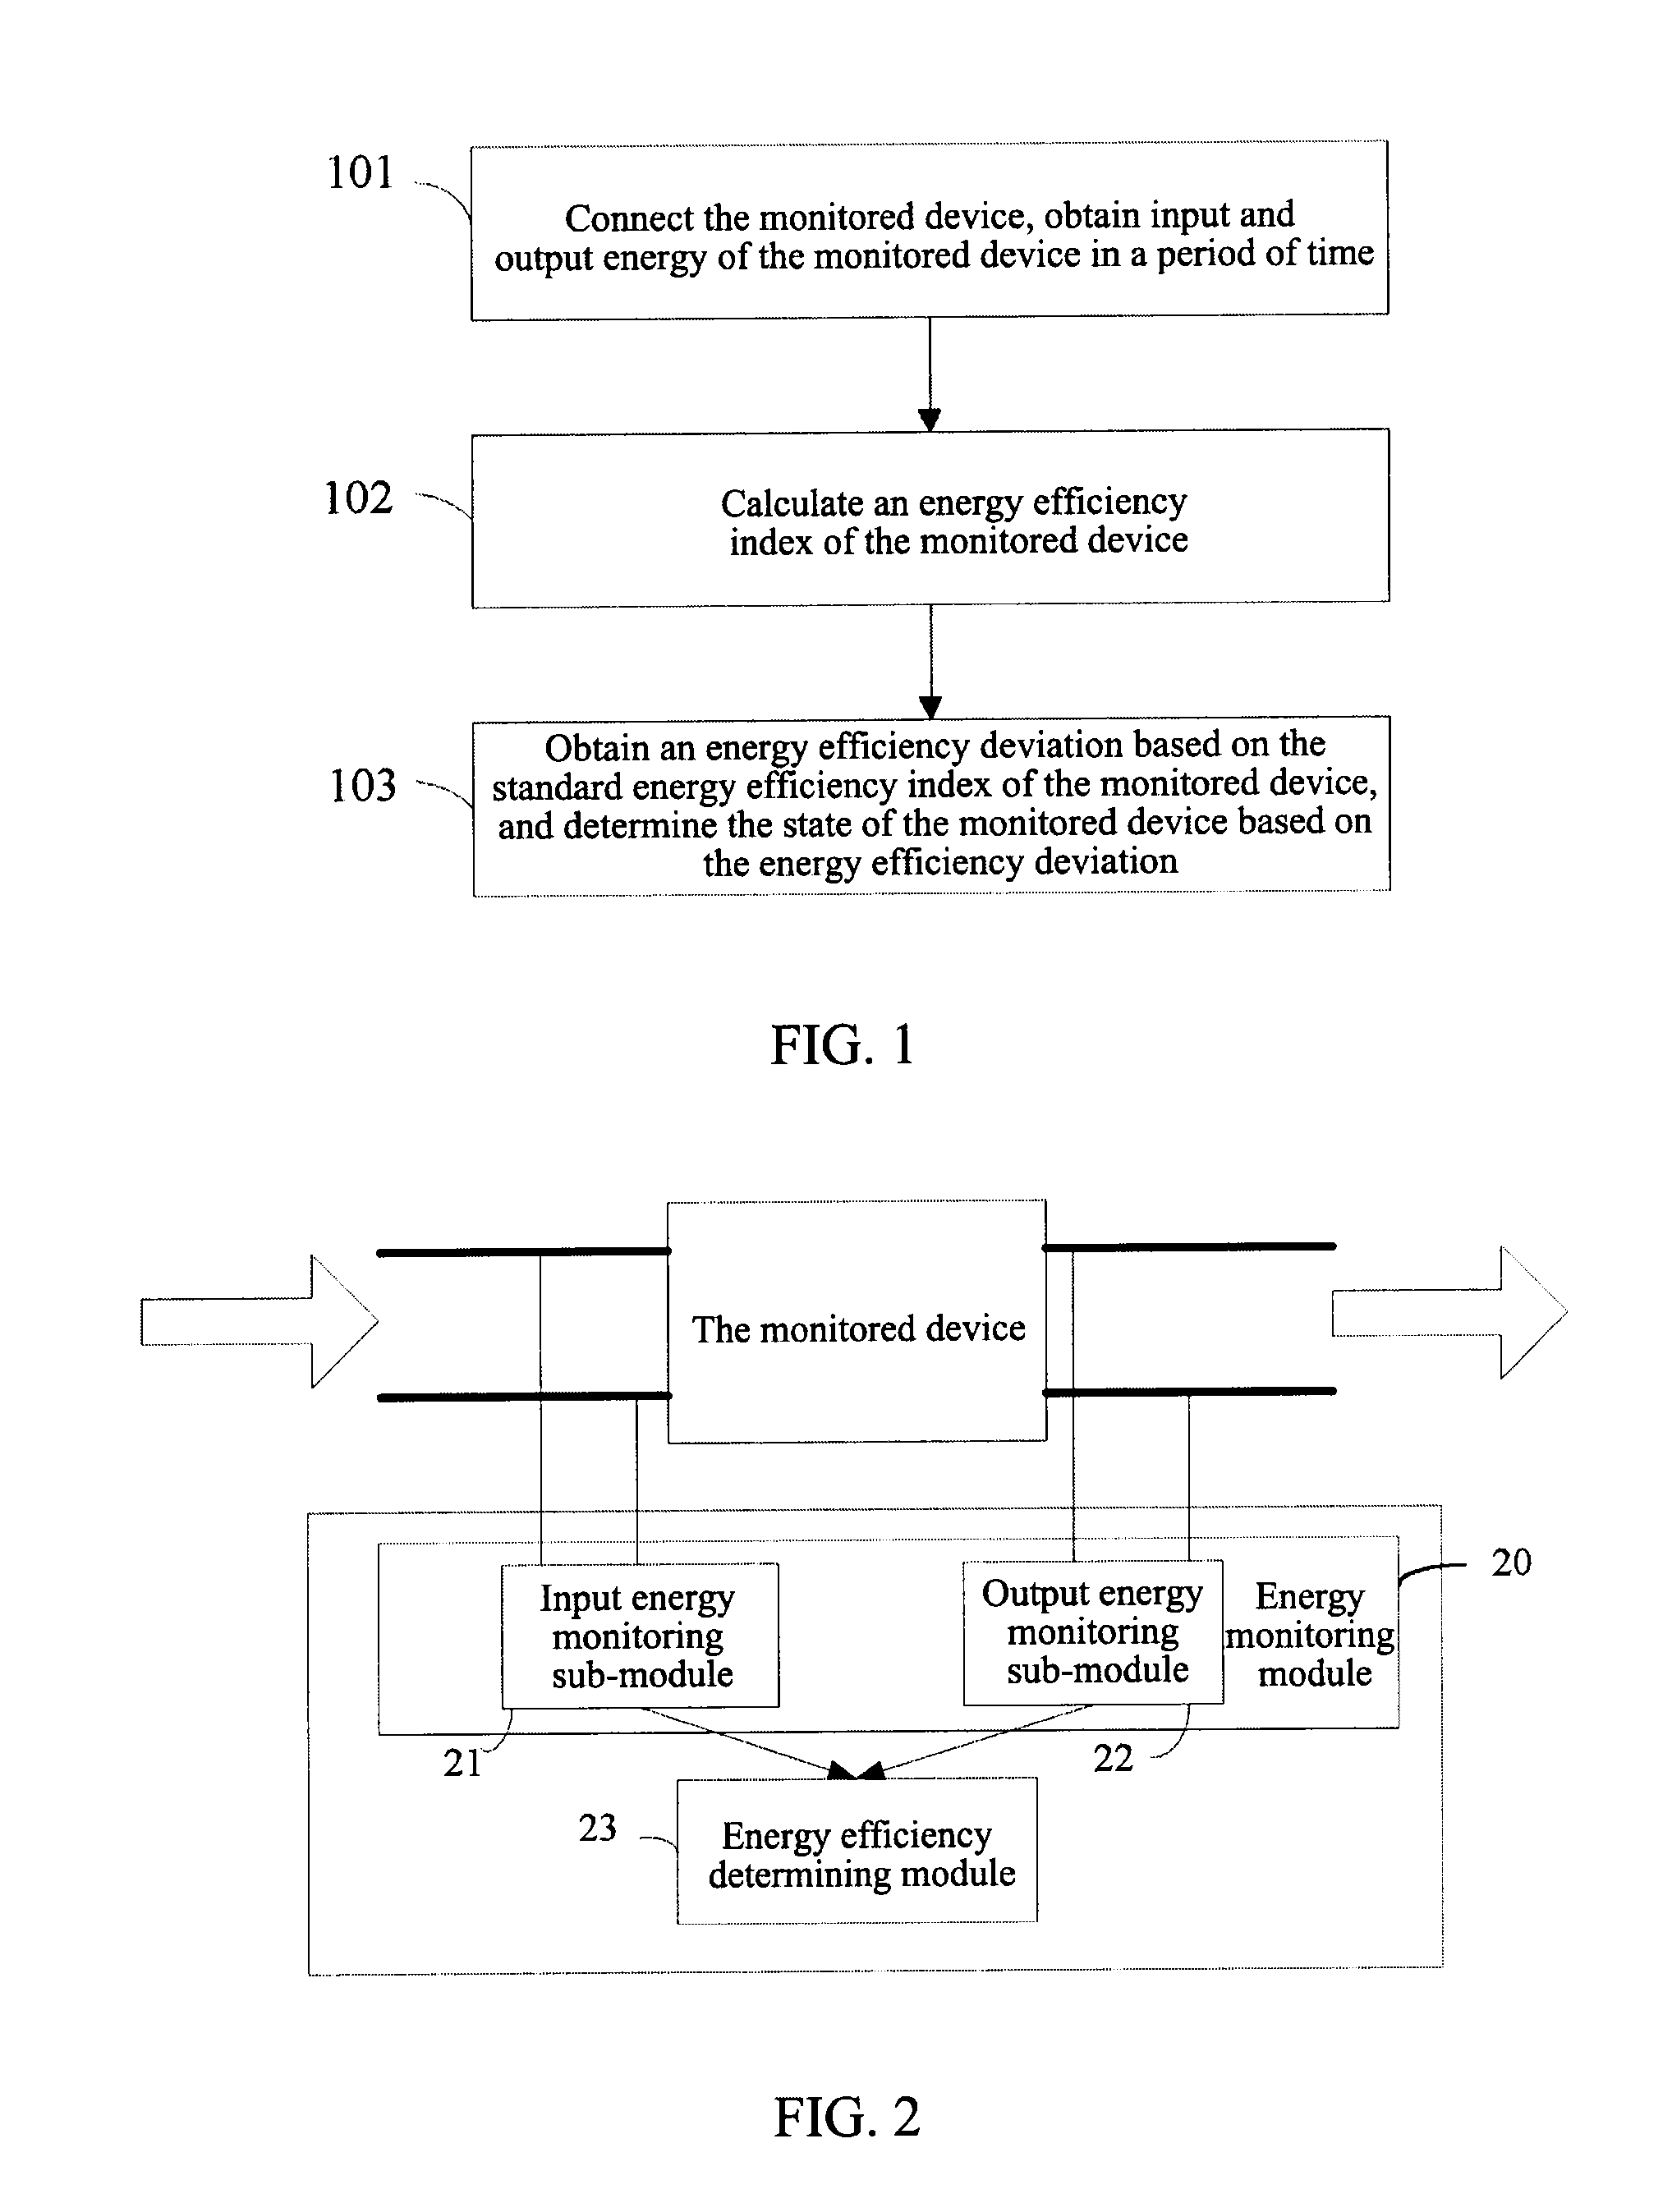 Method and Device for Monitoring Energy Efficiency Performance of Equipment